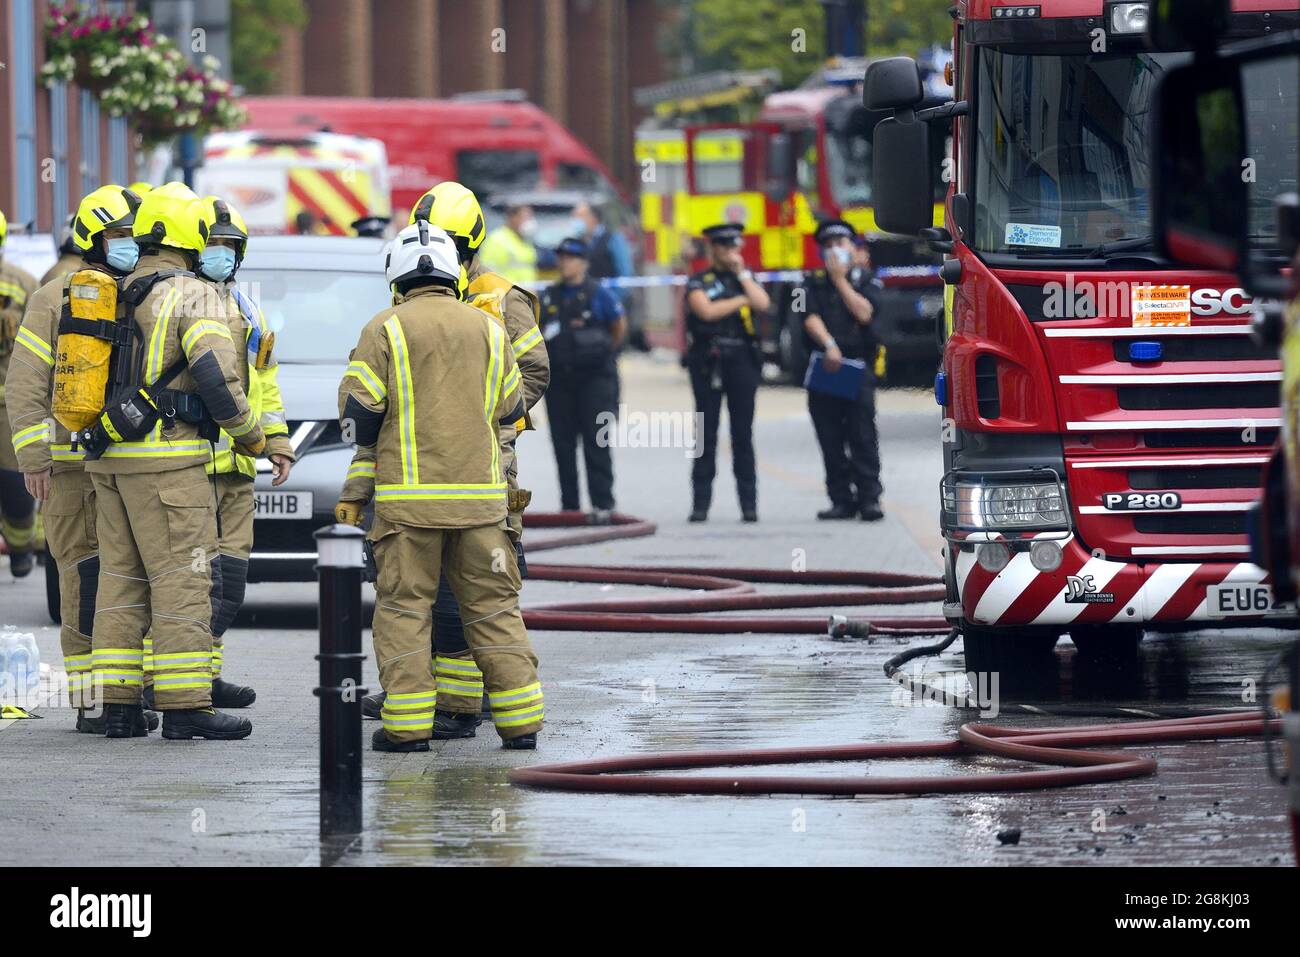 Maidstone, Kent, UK. Emergency services attending a large fire in the town centre.  14th July 2021. Stock Photo